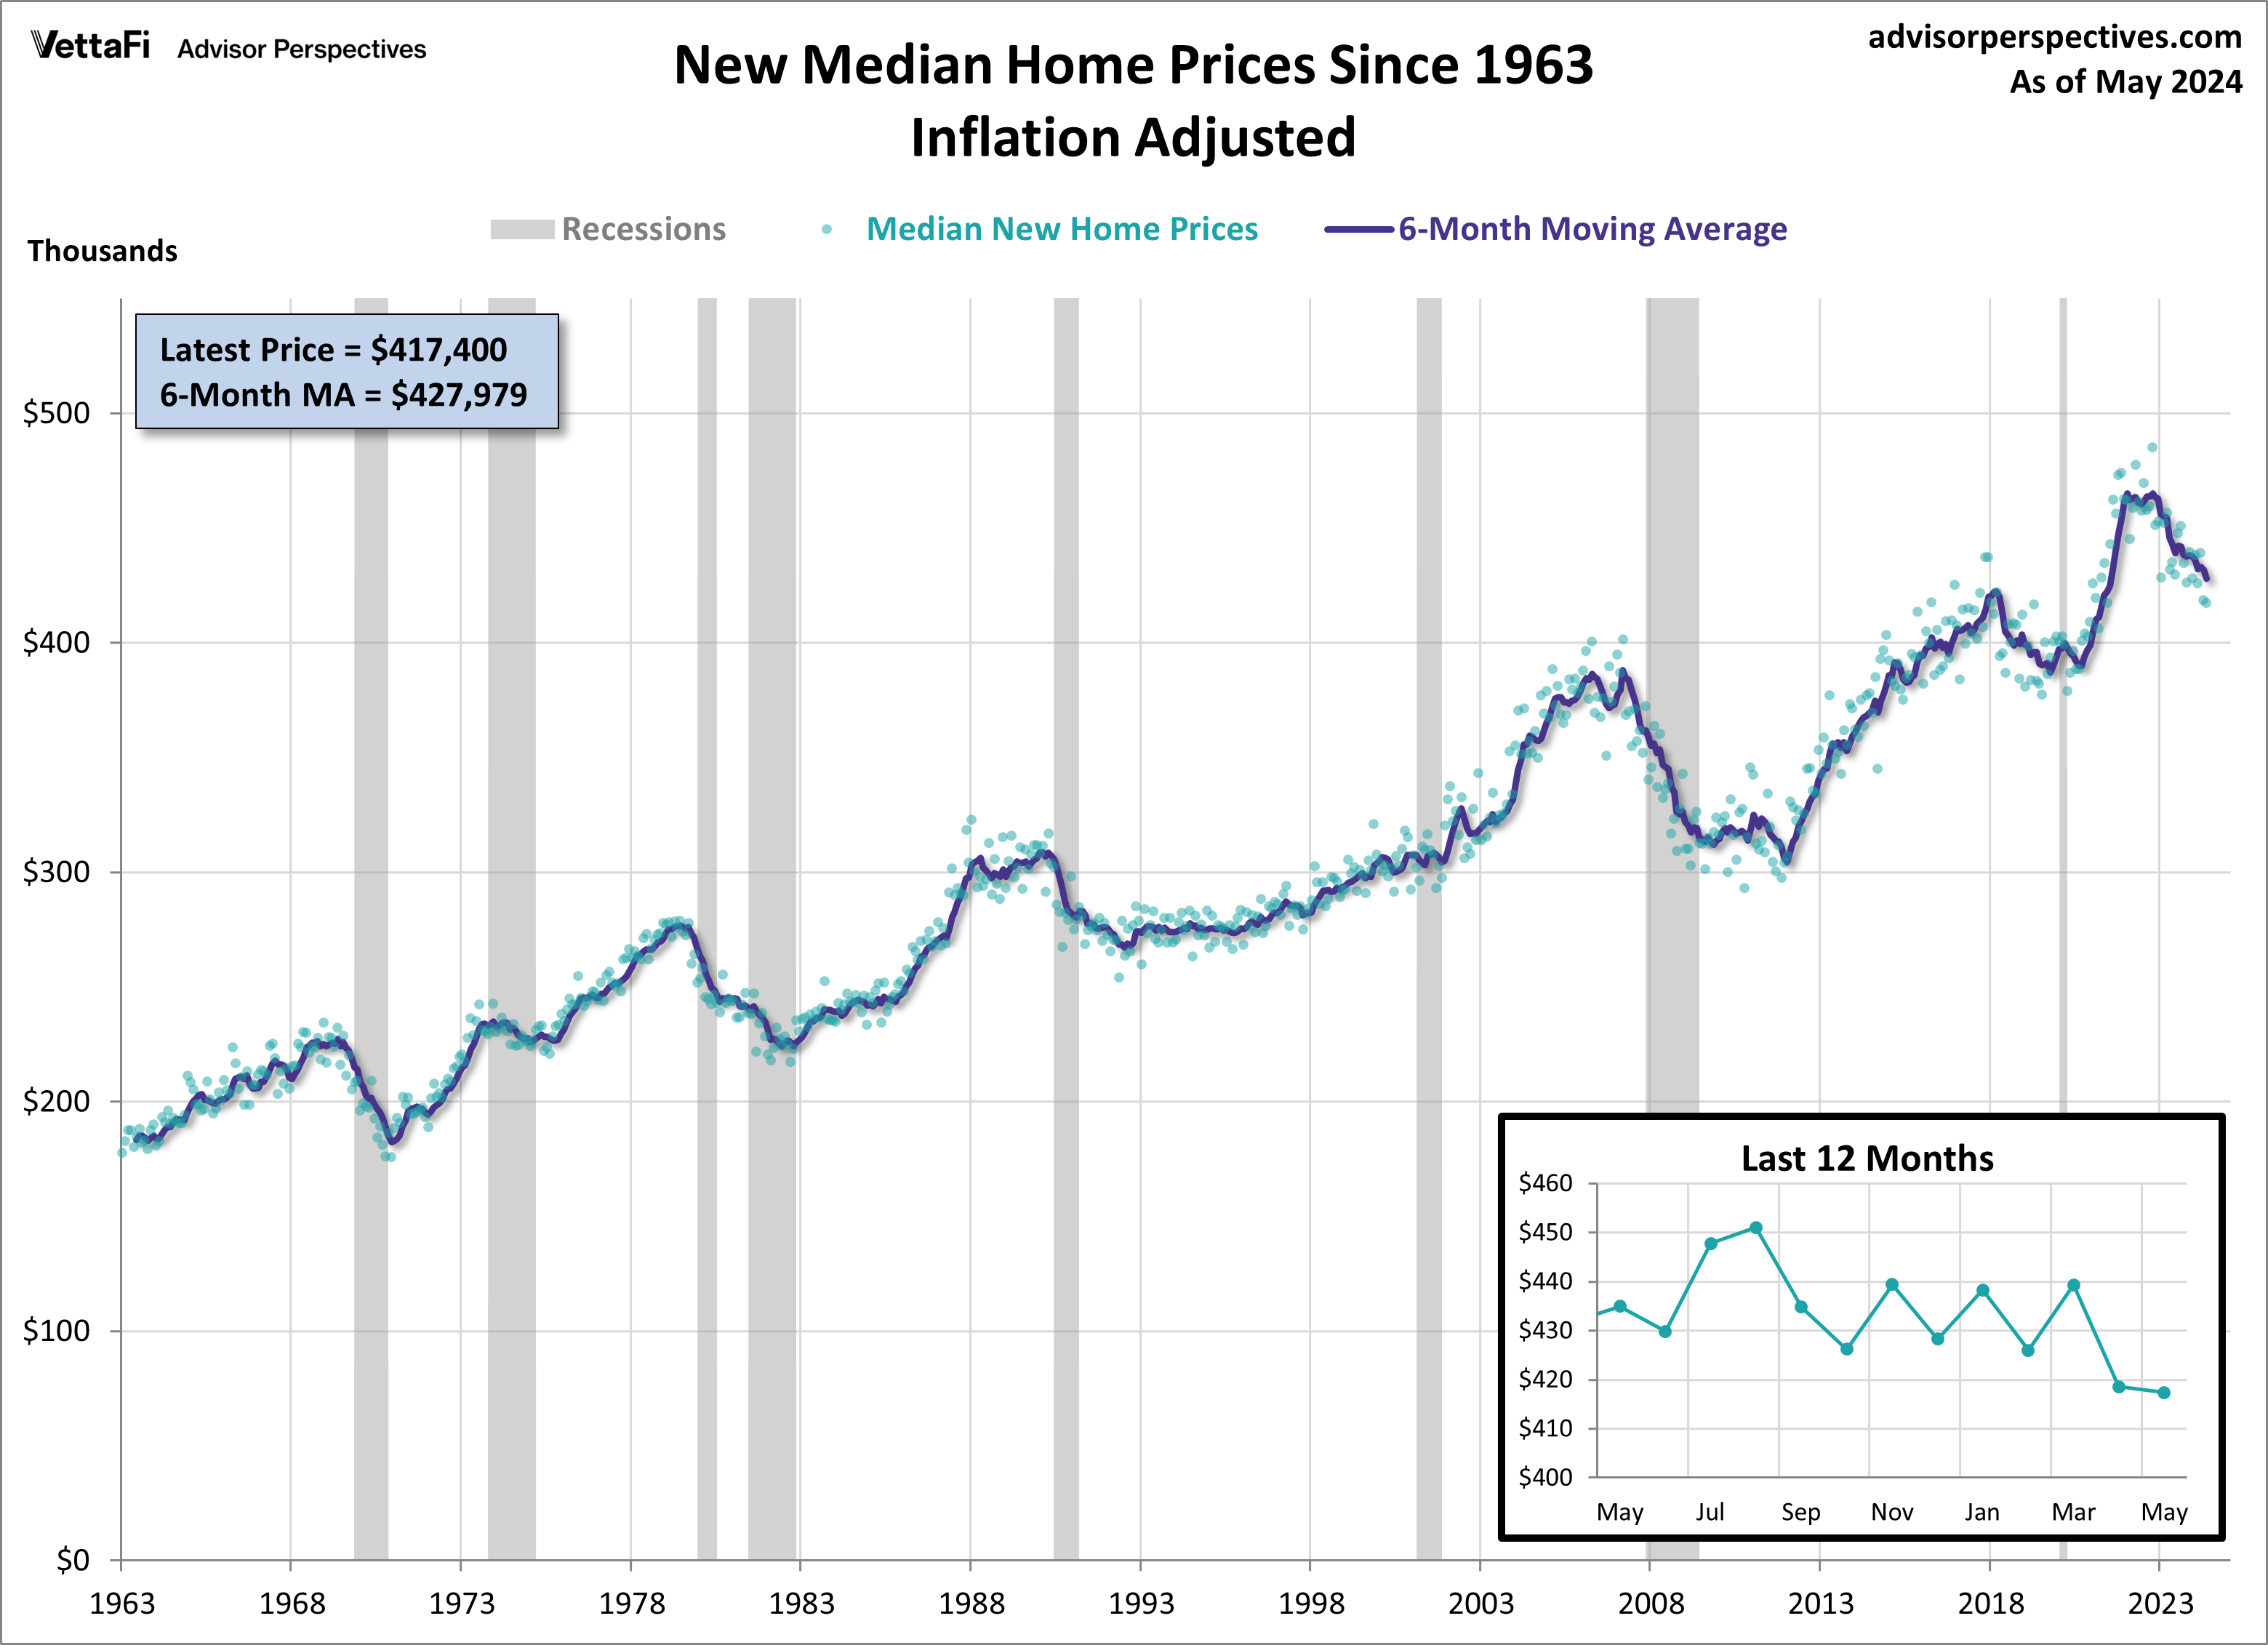 New Median Home Prices Since 1963 - Inflation Adjusted